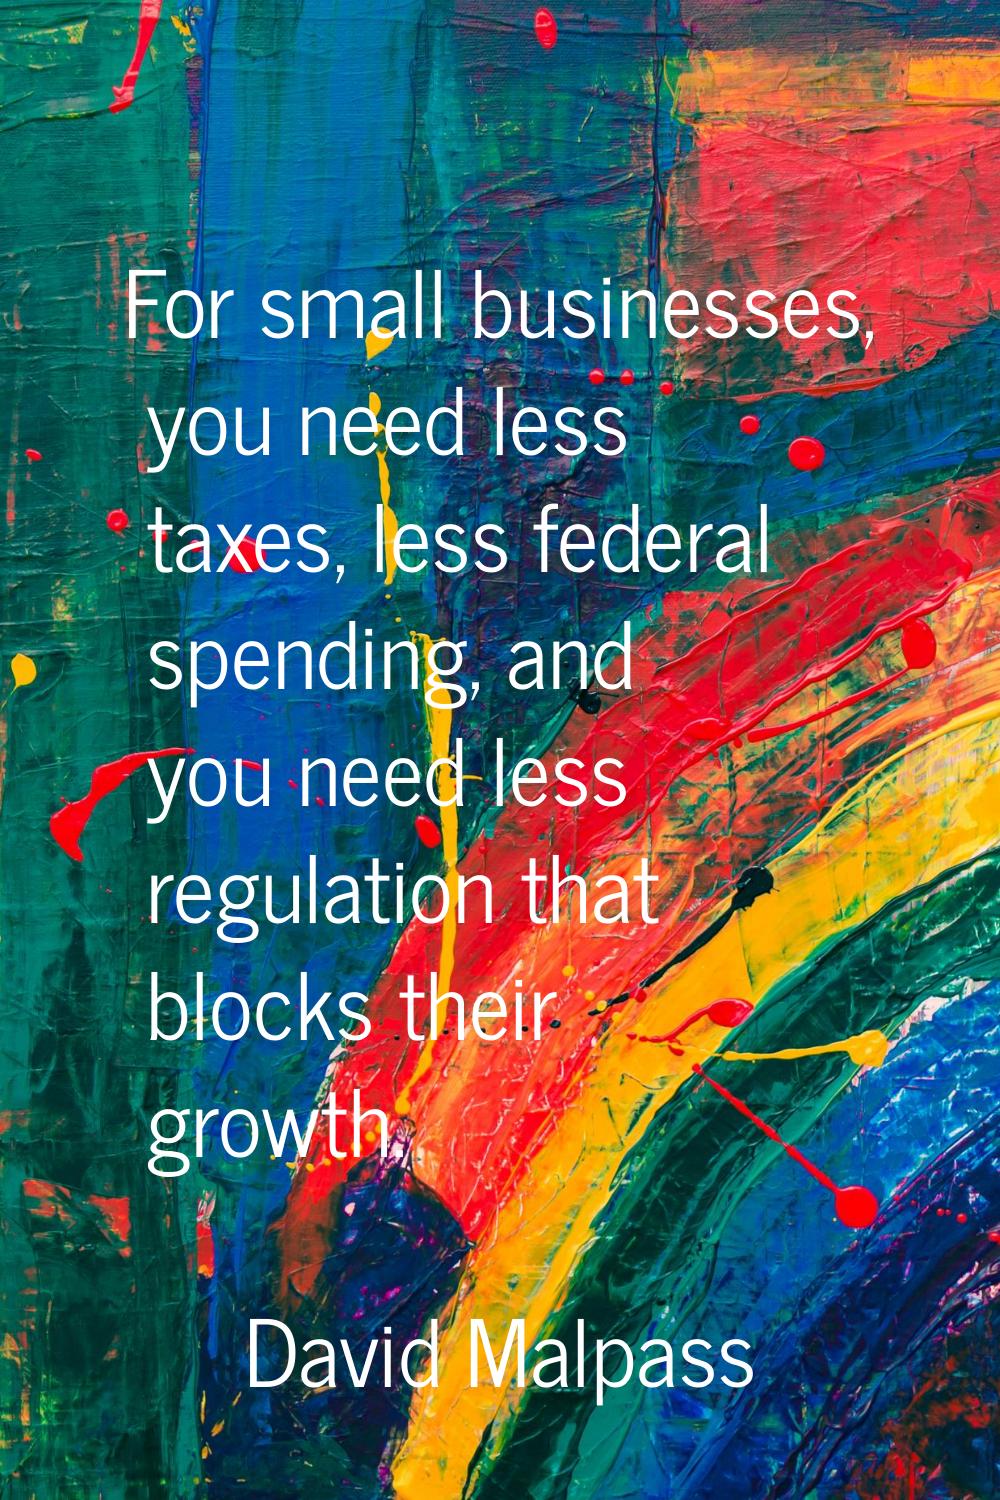 For small businesses, you need less taxes, less federal spending, and you need less regulation that